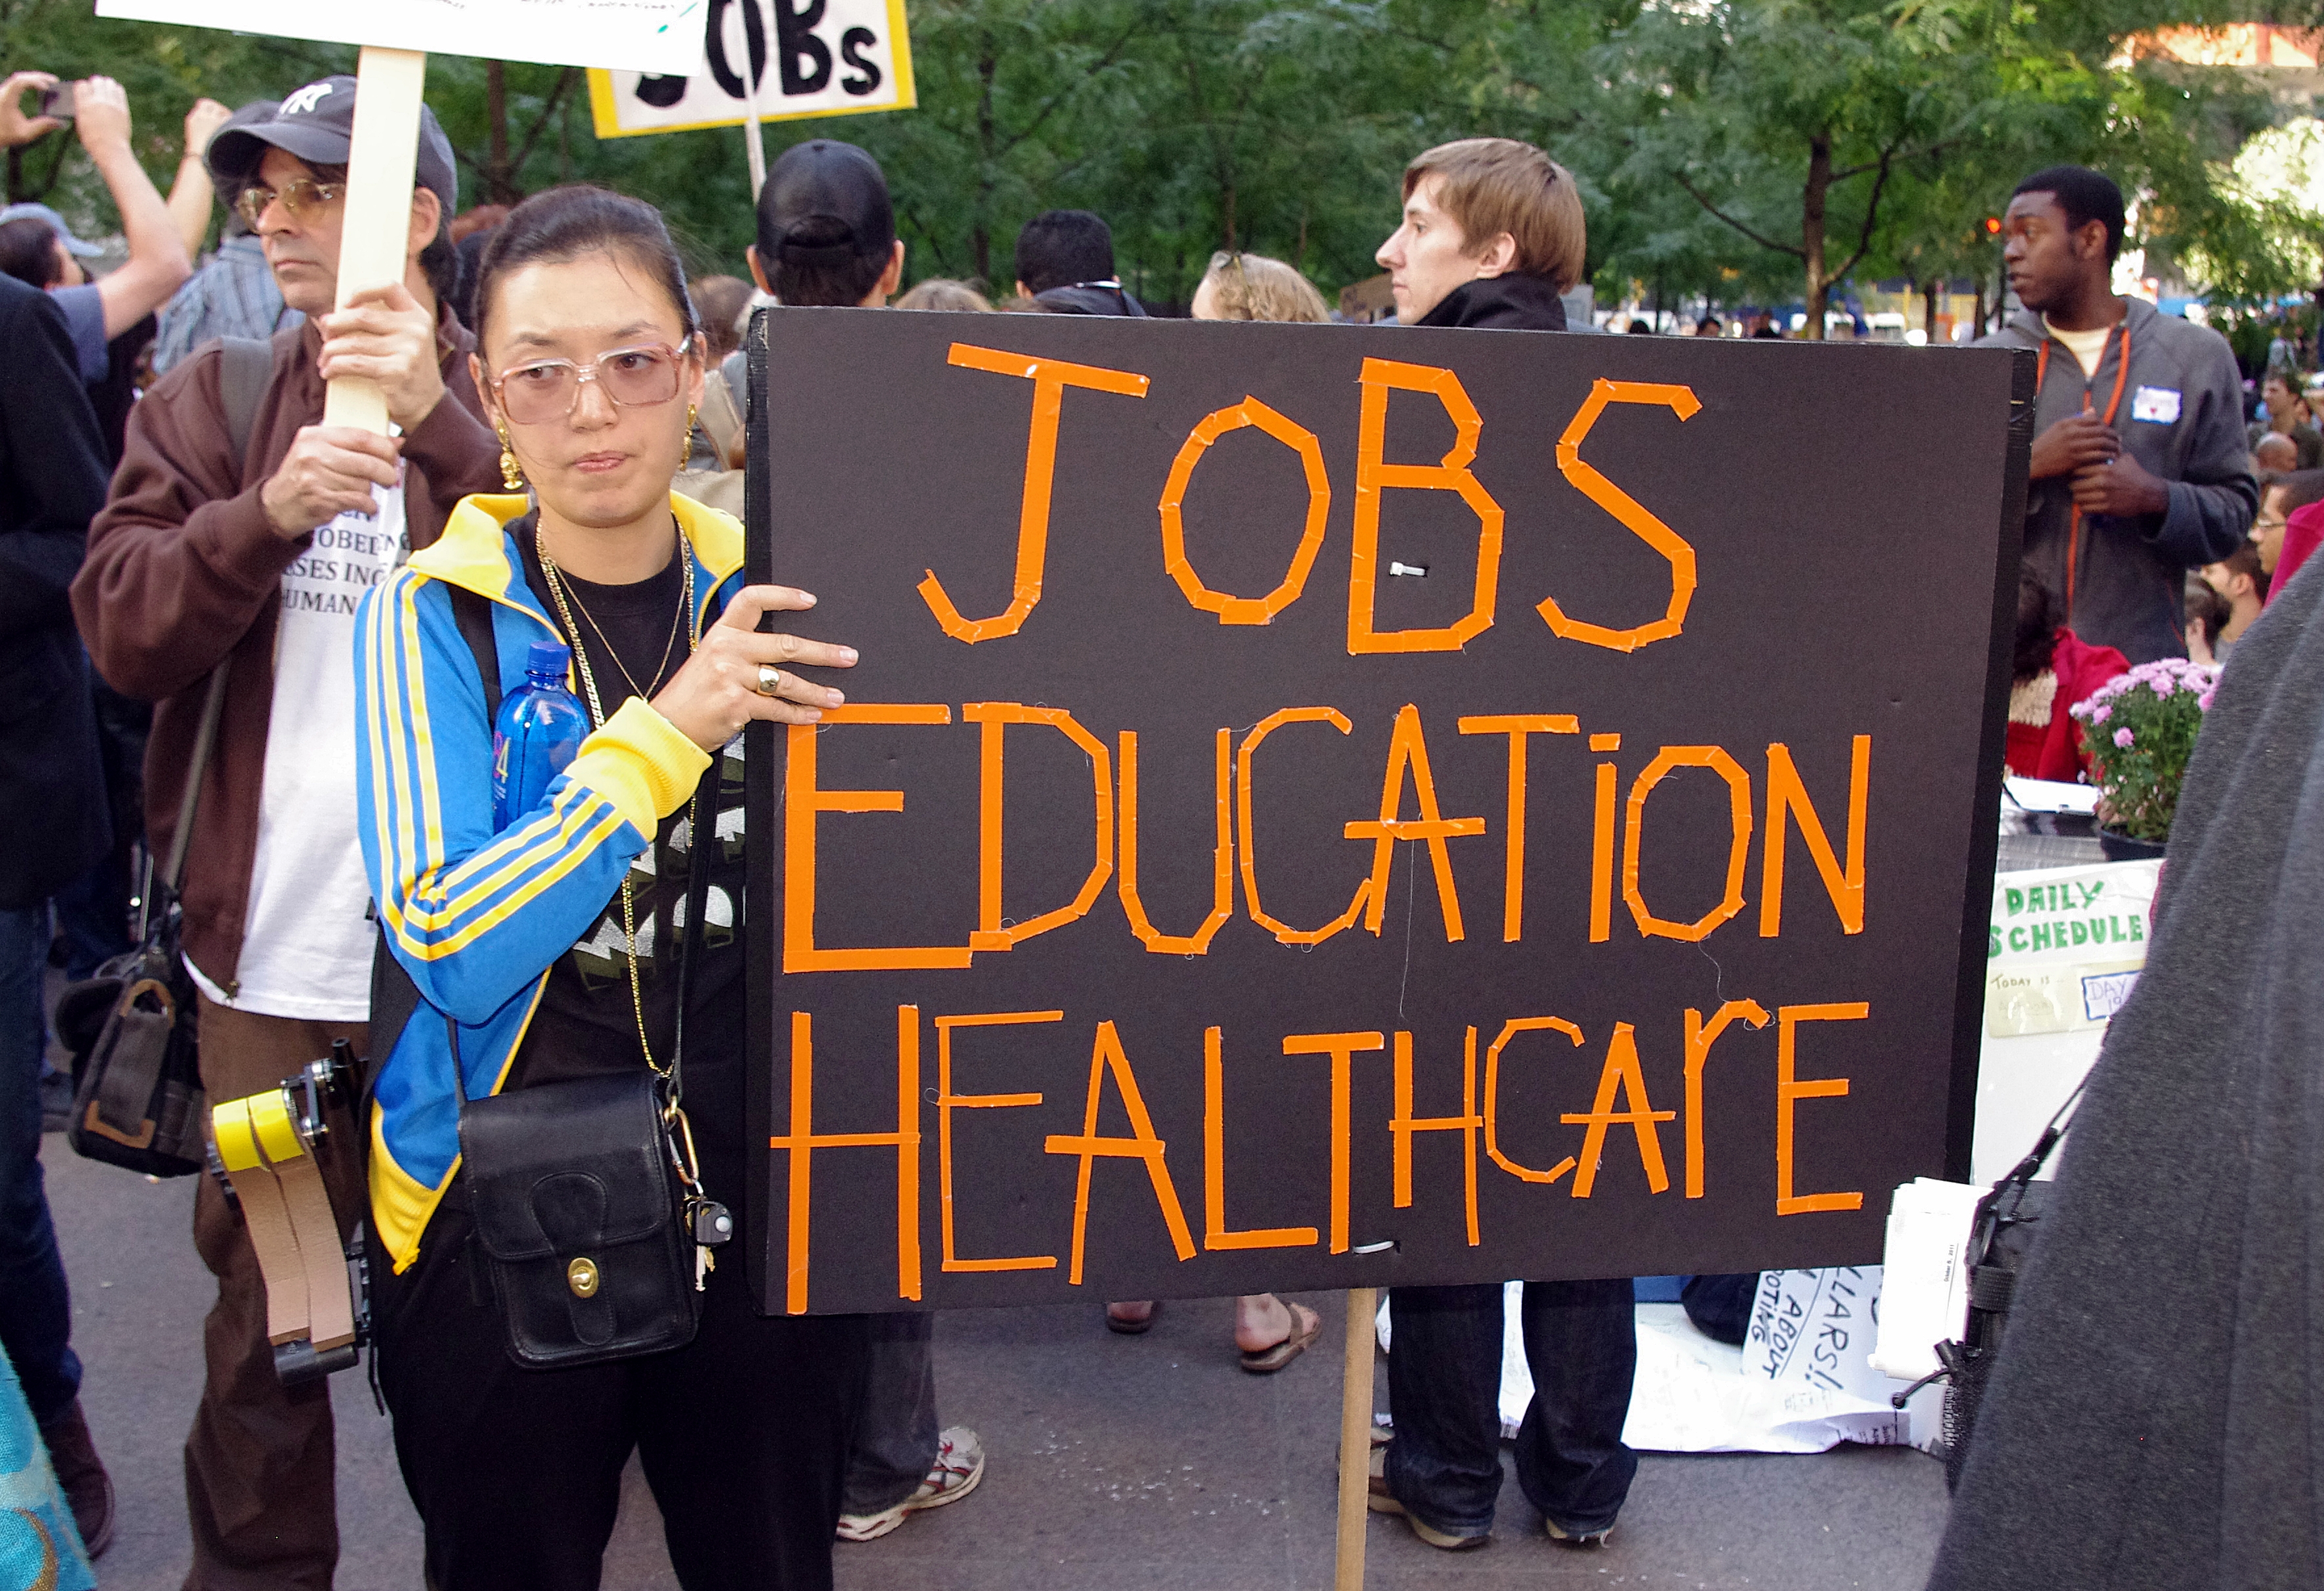 A woman stands in the foreground holding a protest sign that reads "Jobs, Education, Healthcare". There are other protestors in the background.